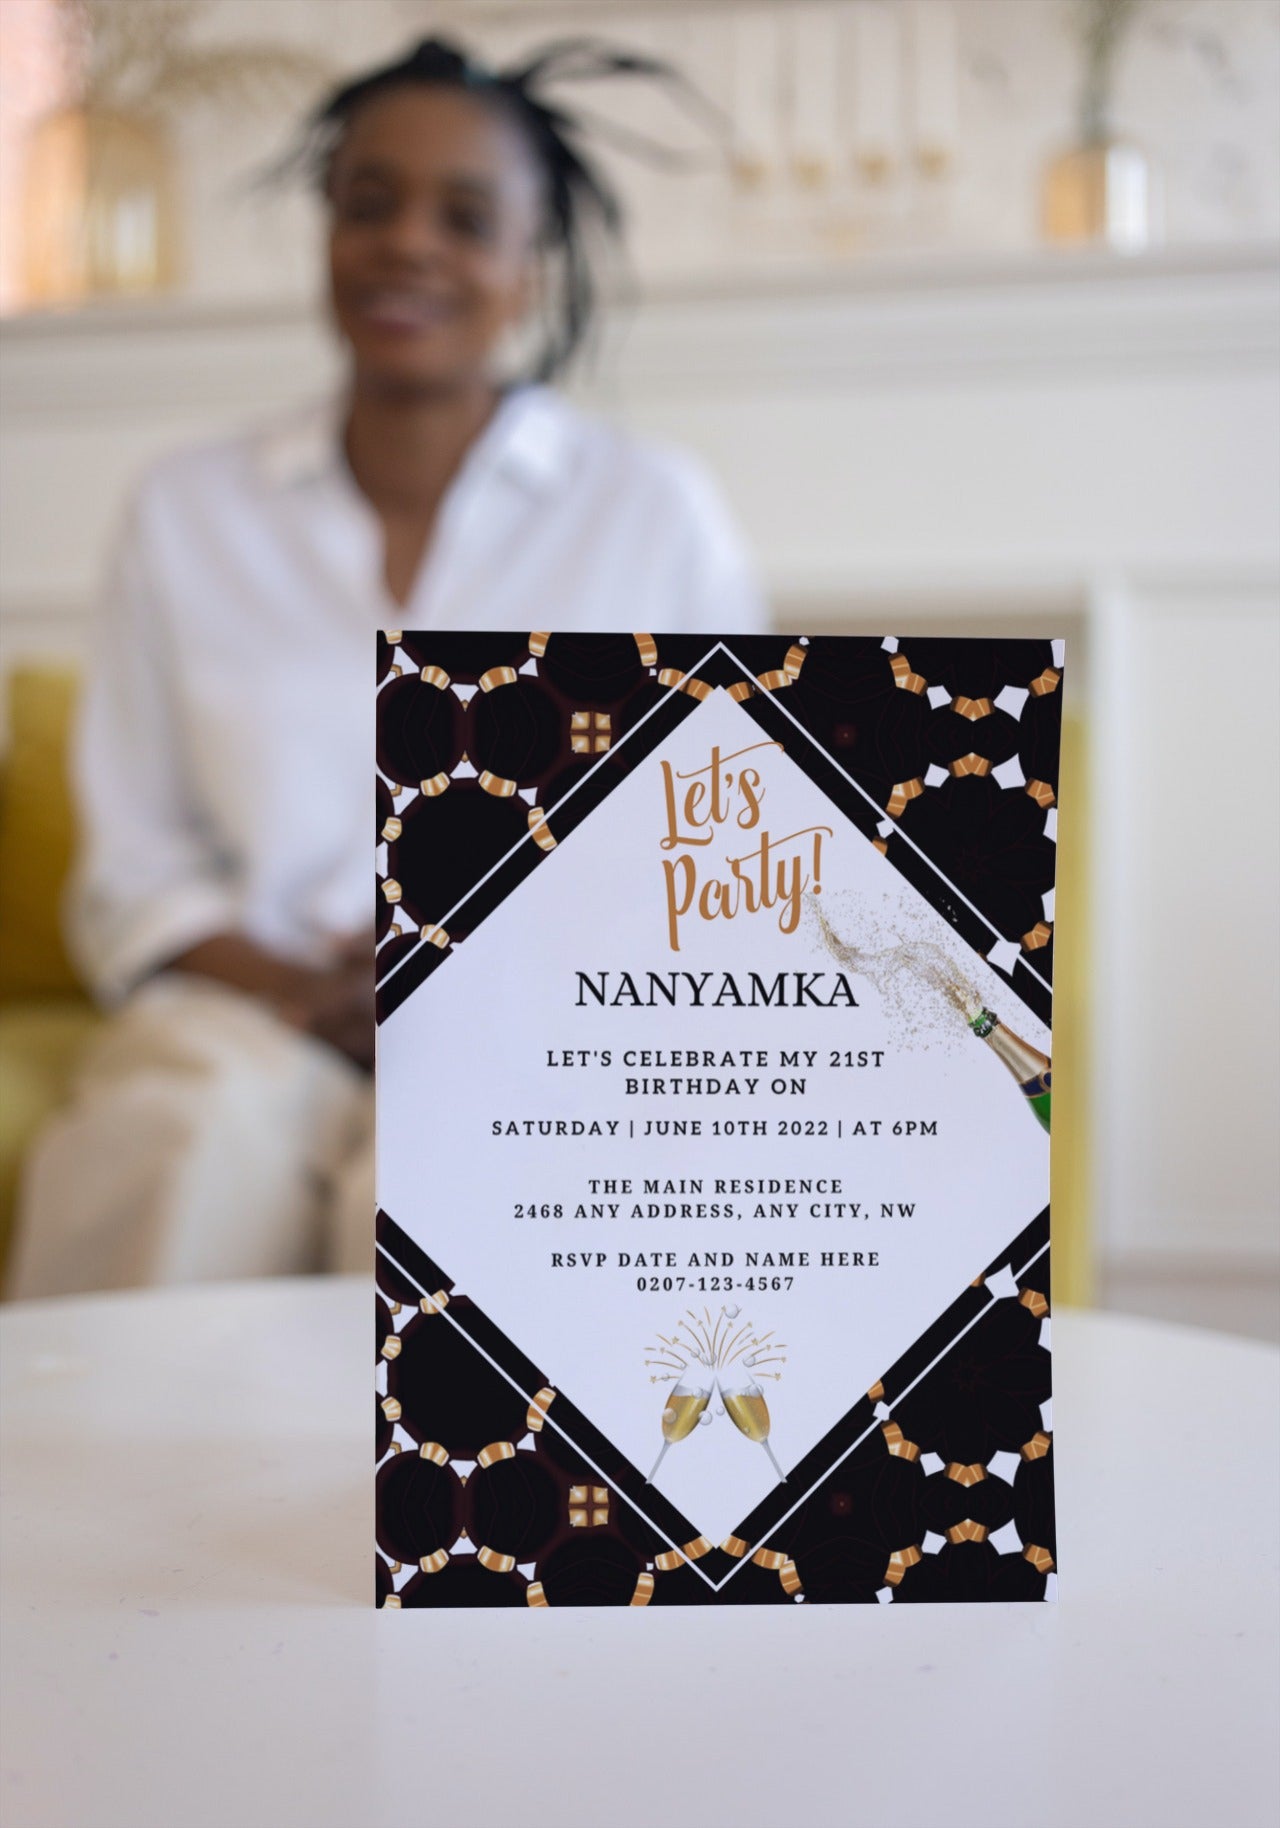 Editable White Beige Gold African Ankara Party Evite, featuring customizable text and design elements, with a woman in the background. Ideal for digital invitations via smartphone.